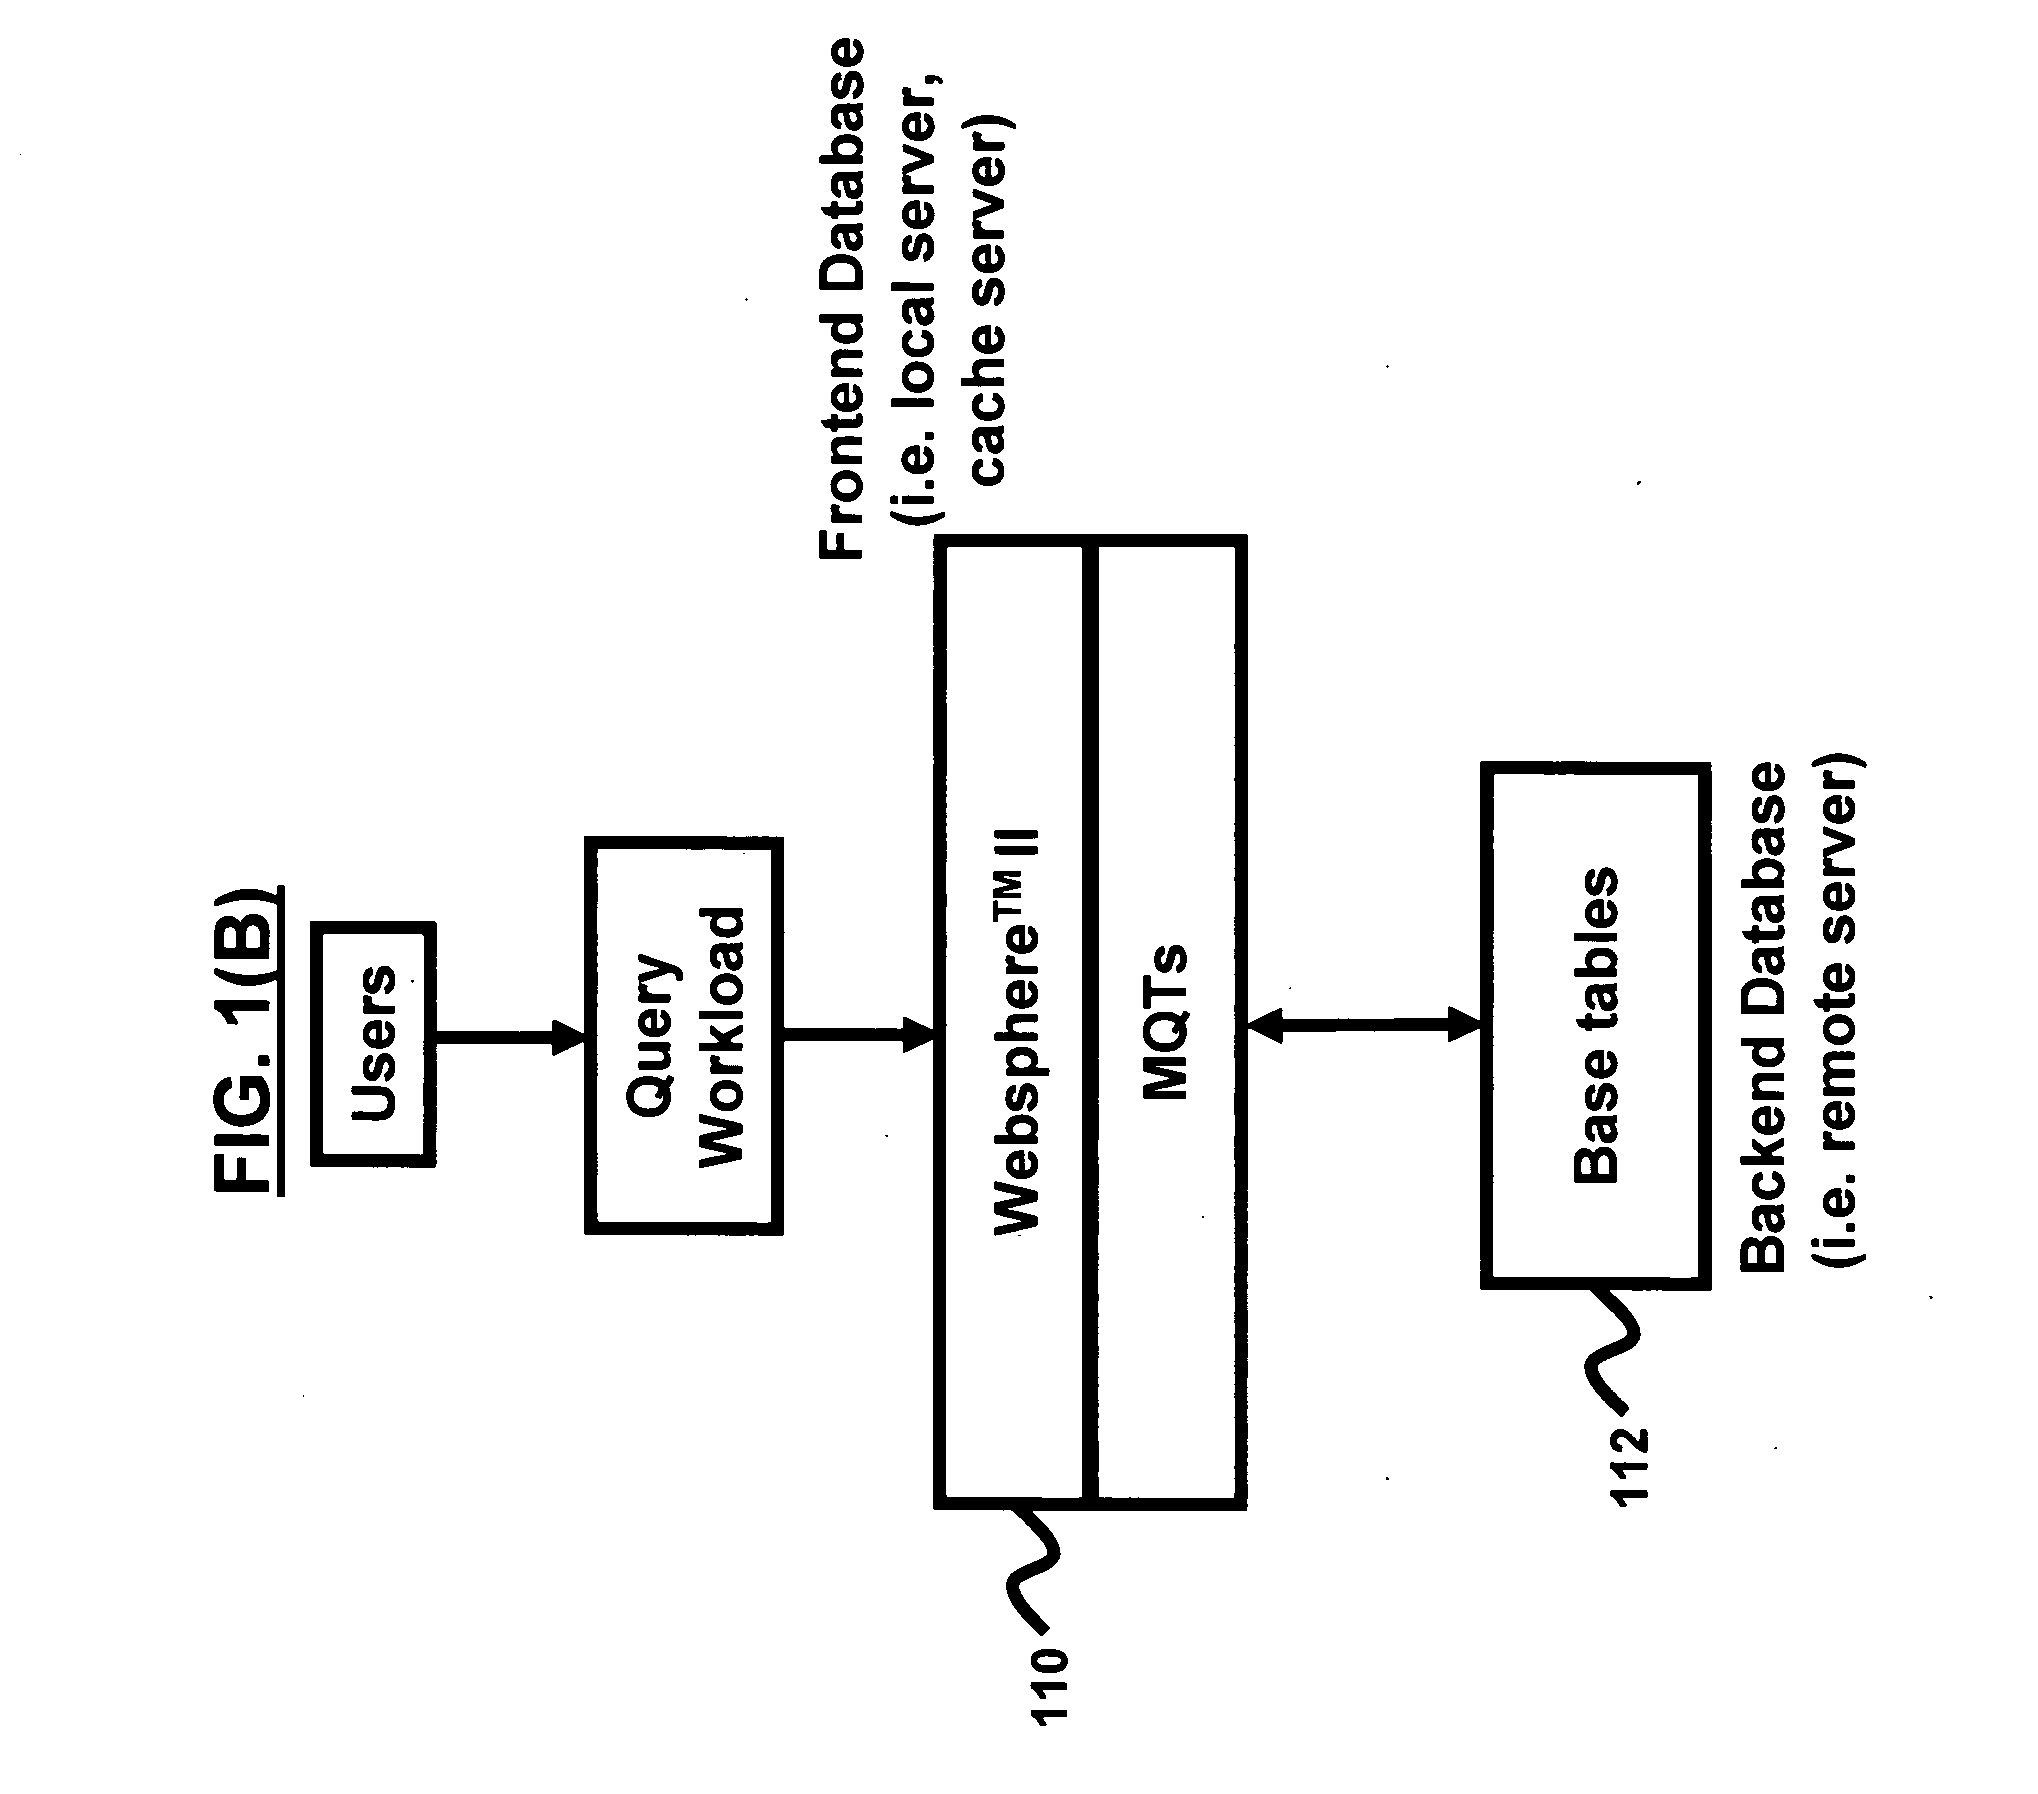 Autonomic recommendation and placement of materialized query tables for load distribution